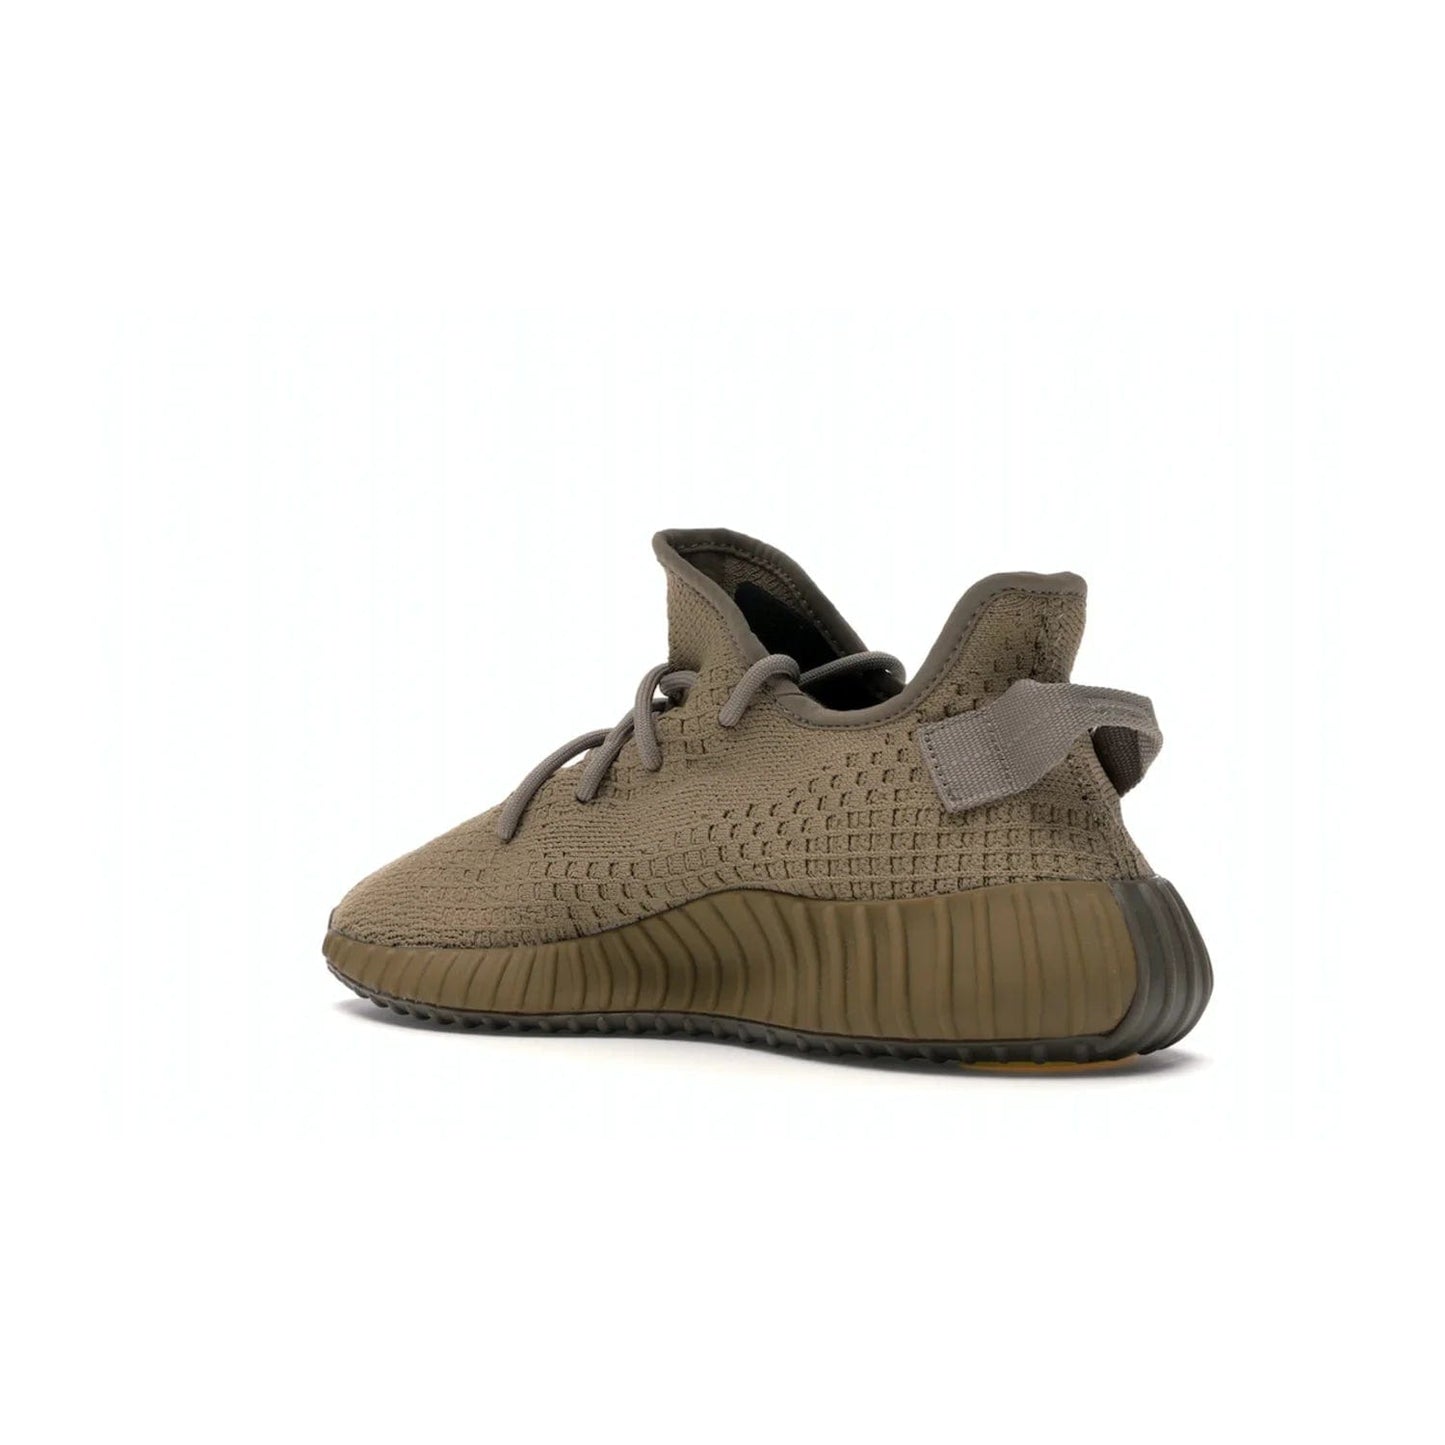 adidas Yeezy Boost 350 V2 Earth - Image 23 - Only at www.BallersClubKickz.com - Abstract style with the adidas Yeezy Boost 350 V2 Earth. Crafted with mud Primeknit upper, mud Boost and interior, and a translucent side stripe. Regional exclusive in Earth/Earth/Earth colorway, these fashionable sneakers released in February 2020. Showcase your style with the Yeezy 350 V2 Earth.